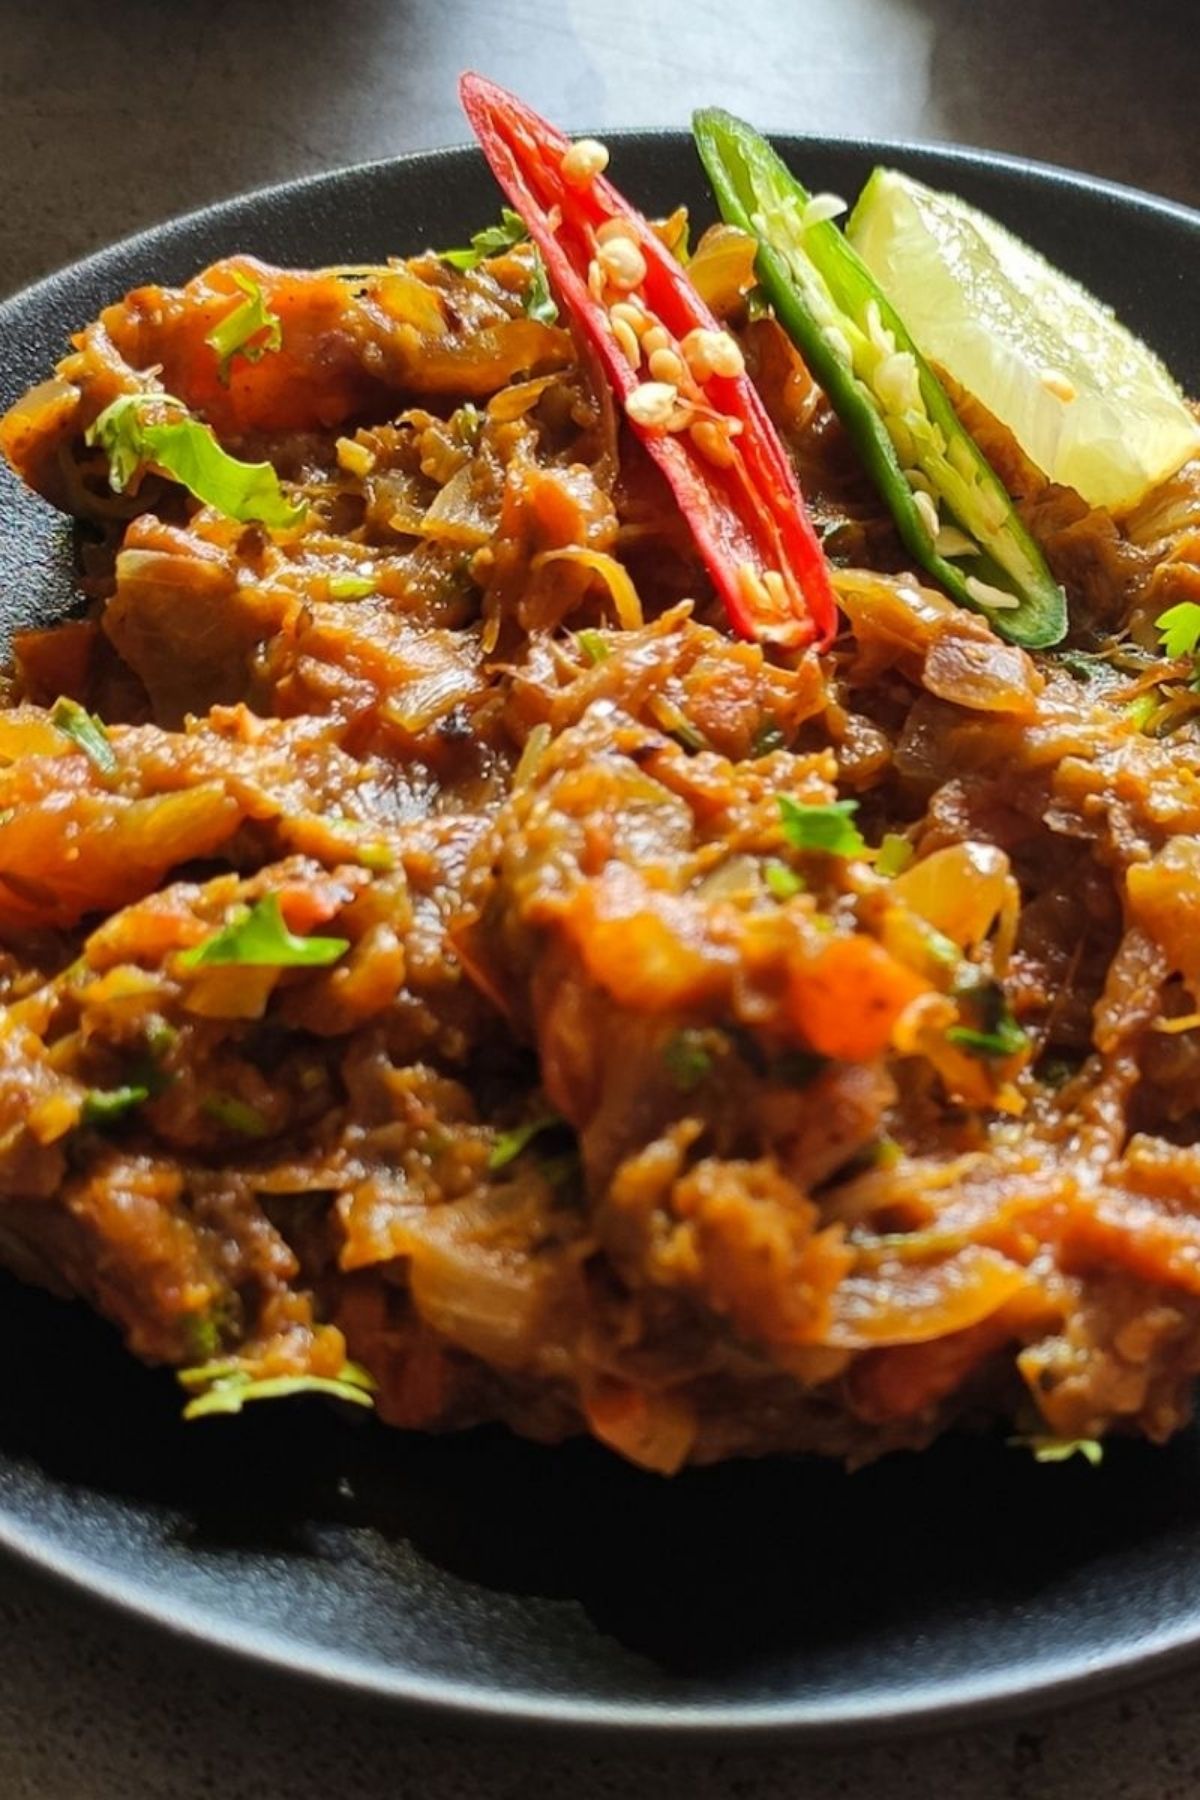 Baingan bharta on a black plate garnished with chili peppers and lemon wedge